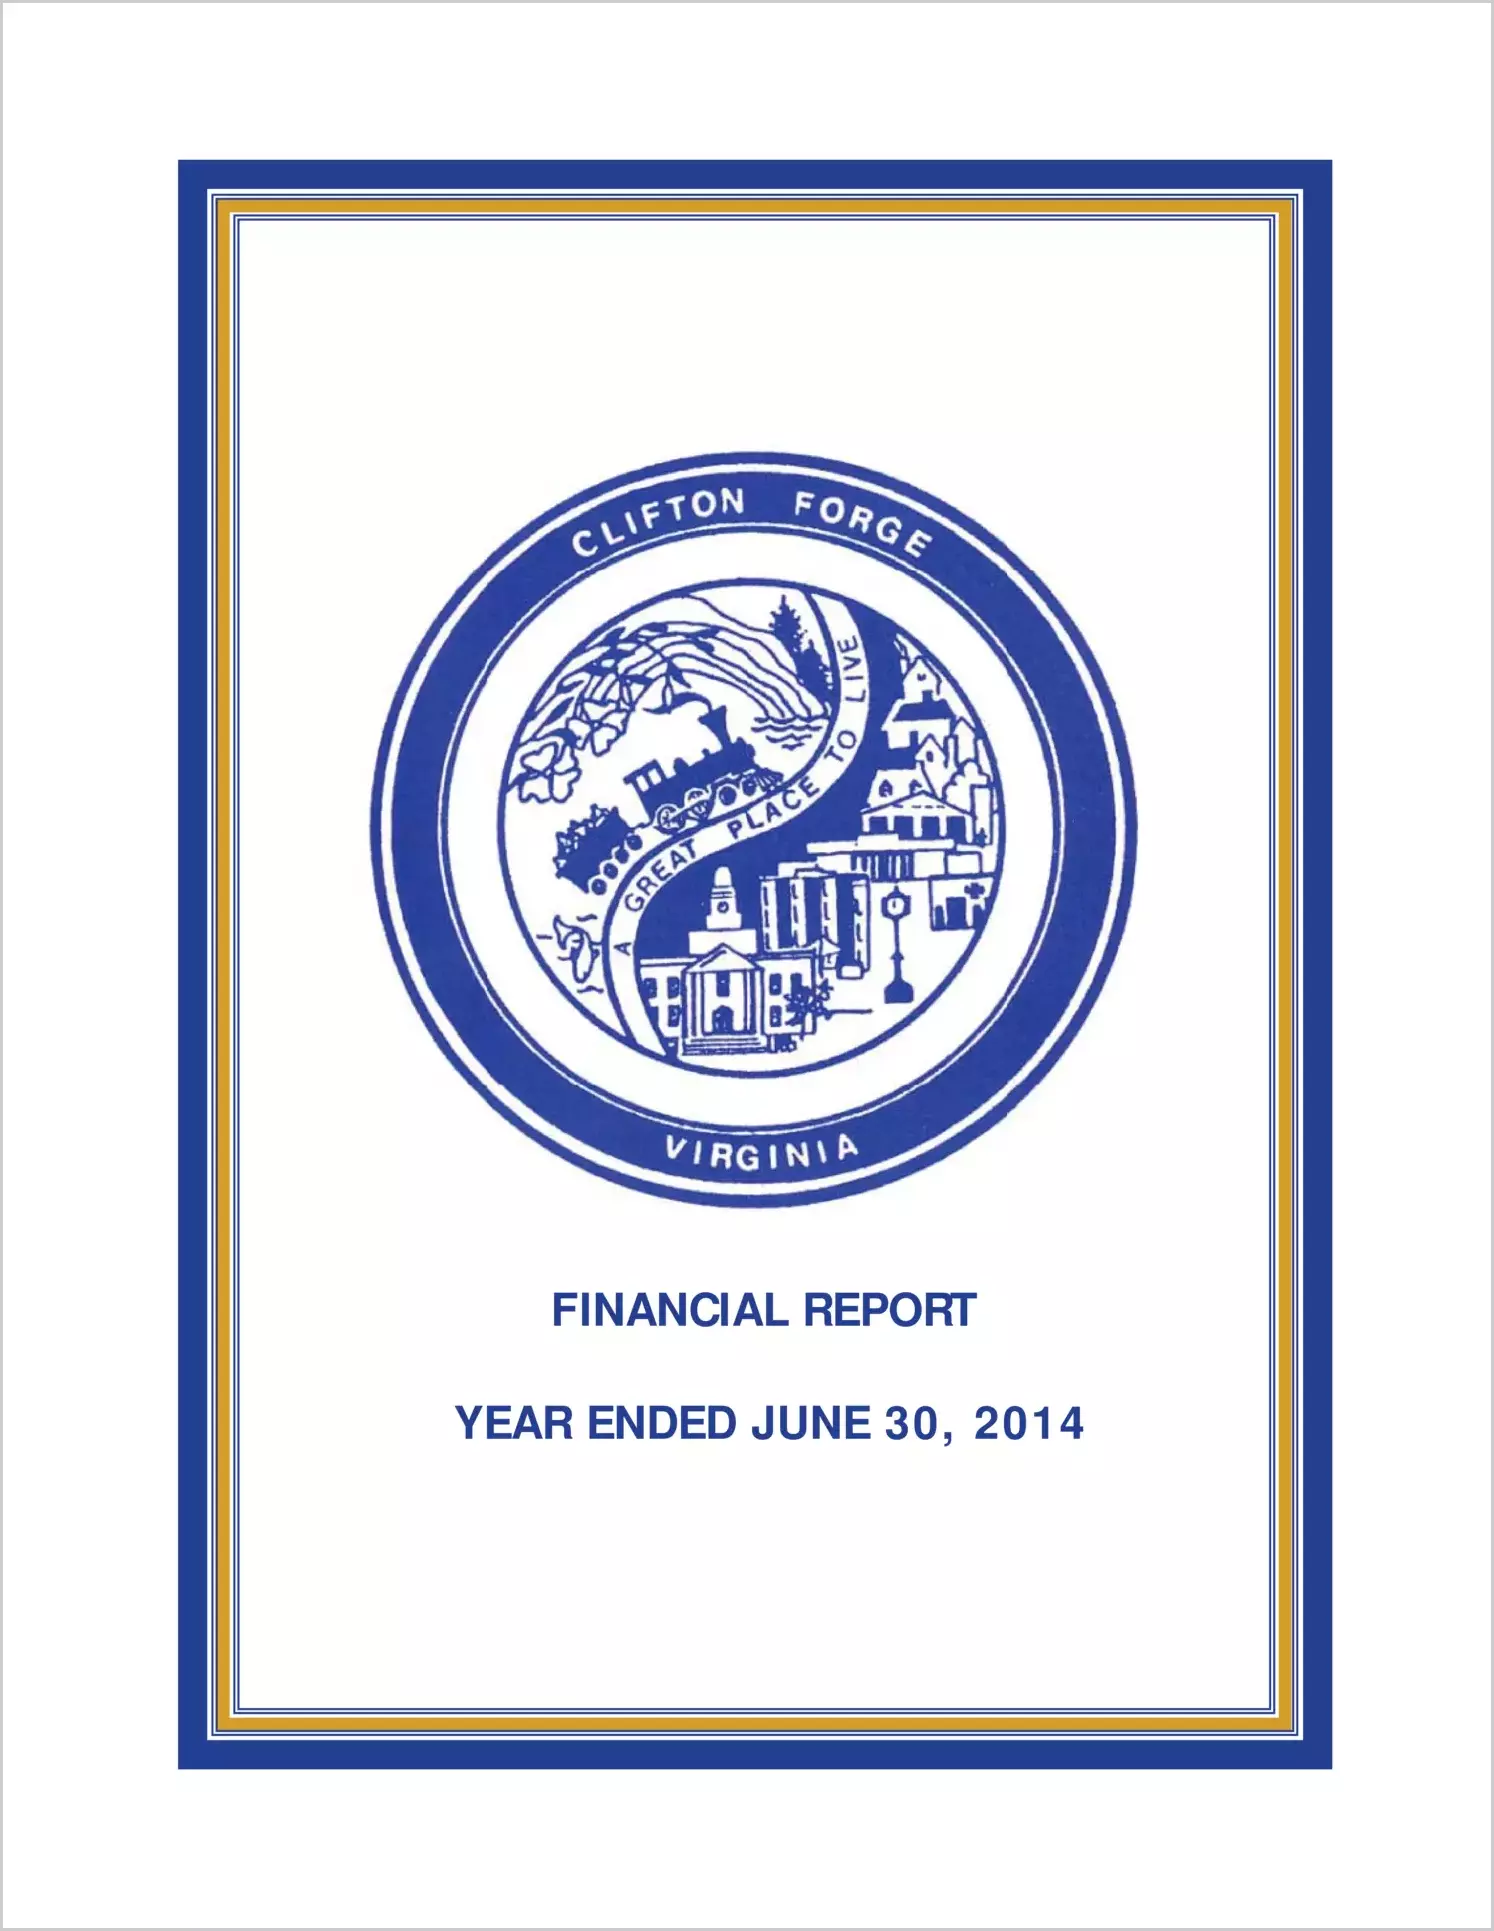 2014 Annual Financial Report for Town of Clifton Forge